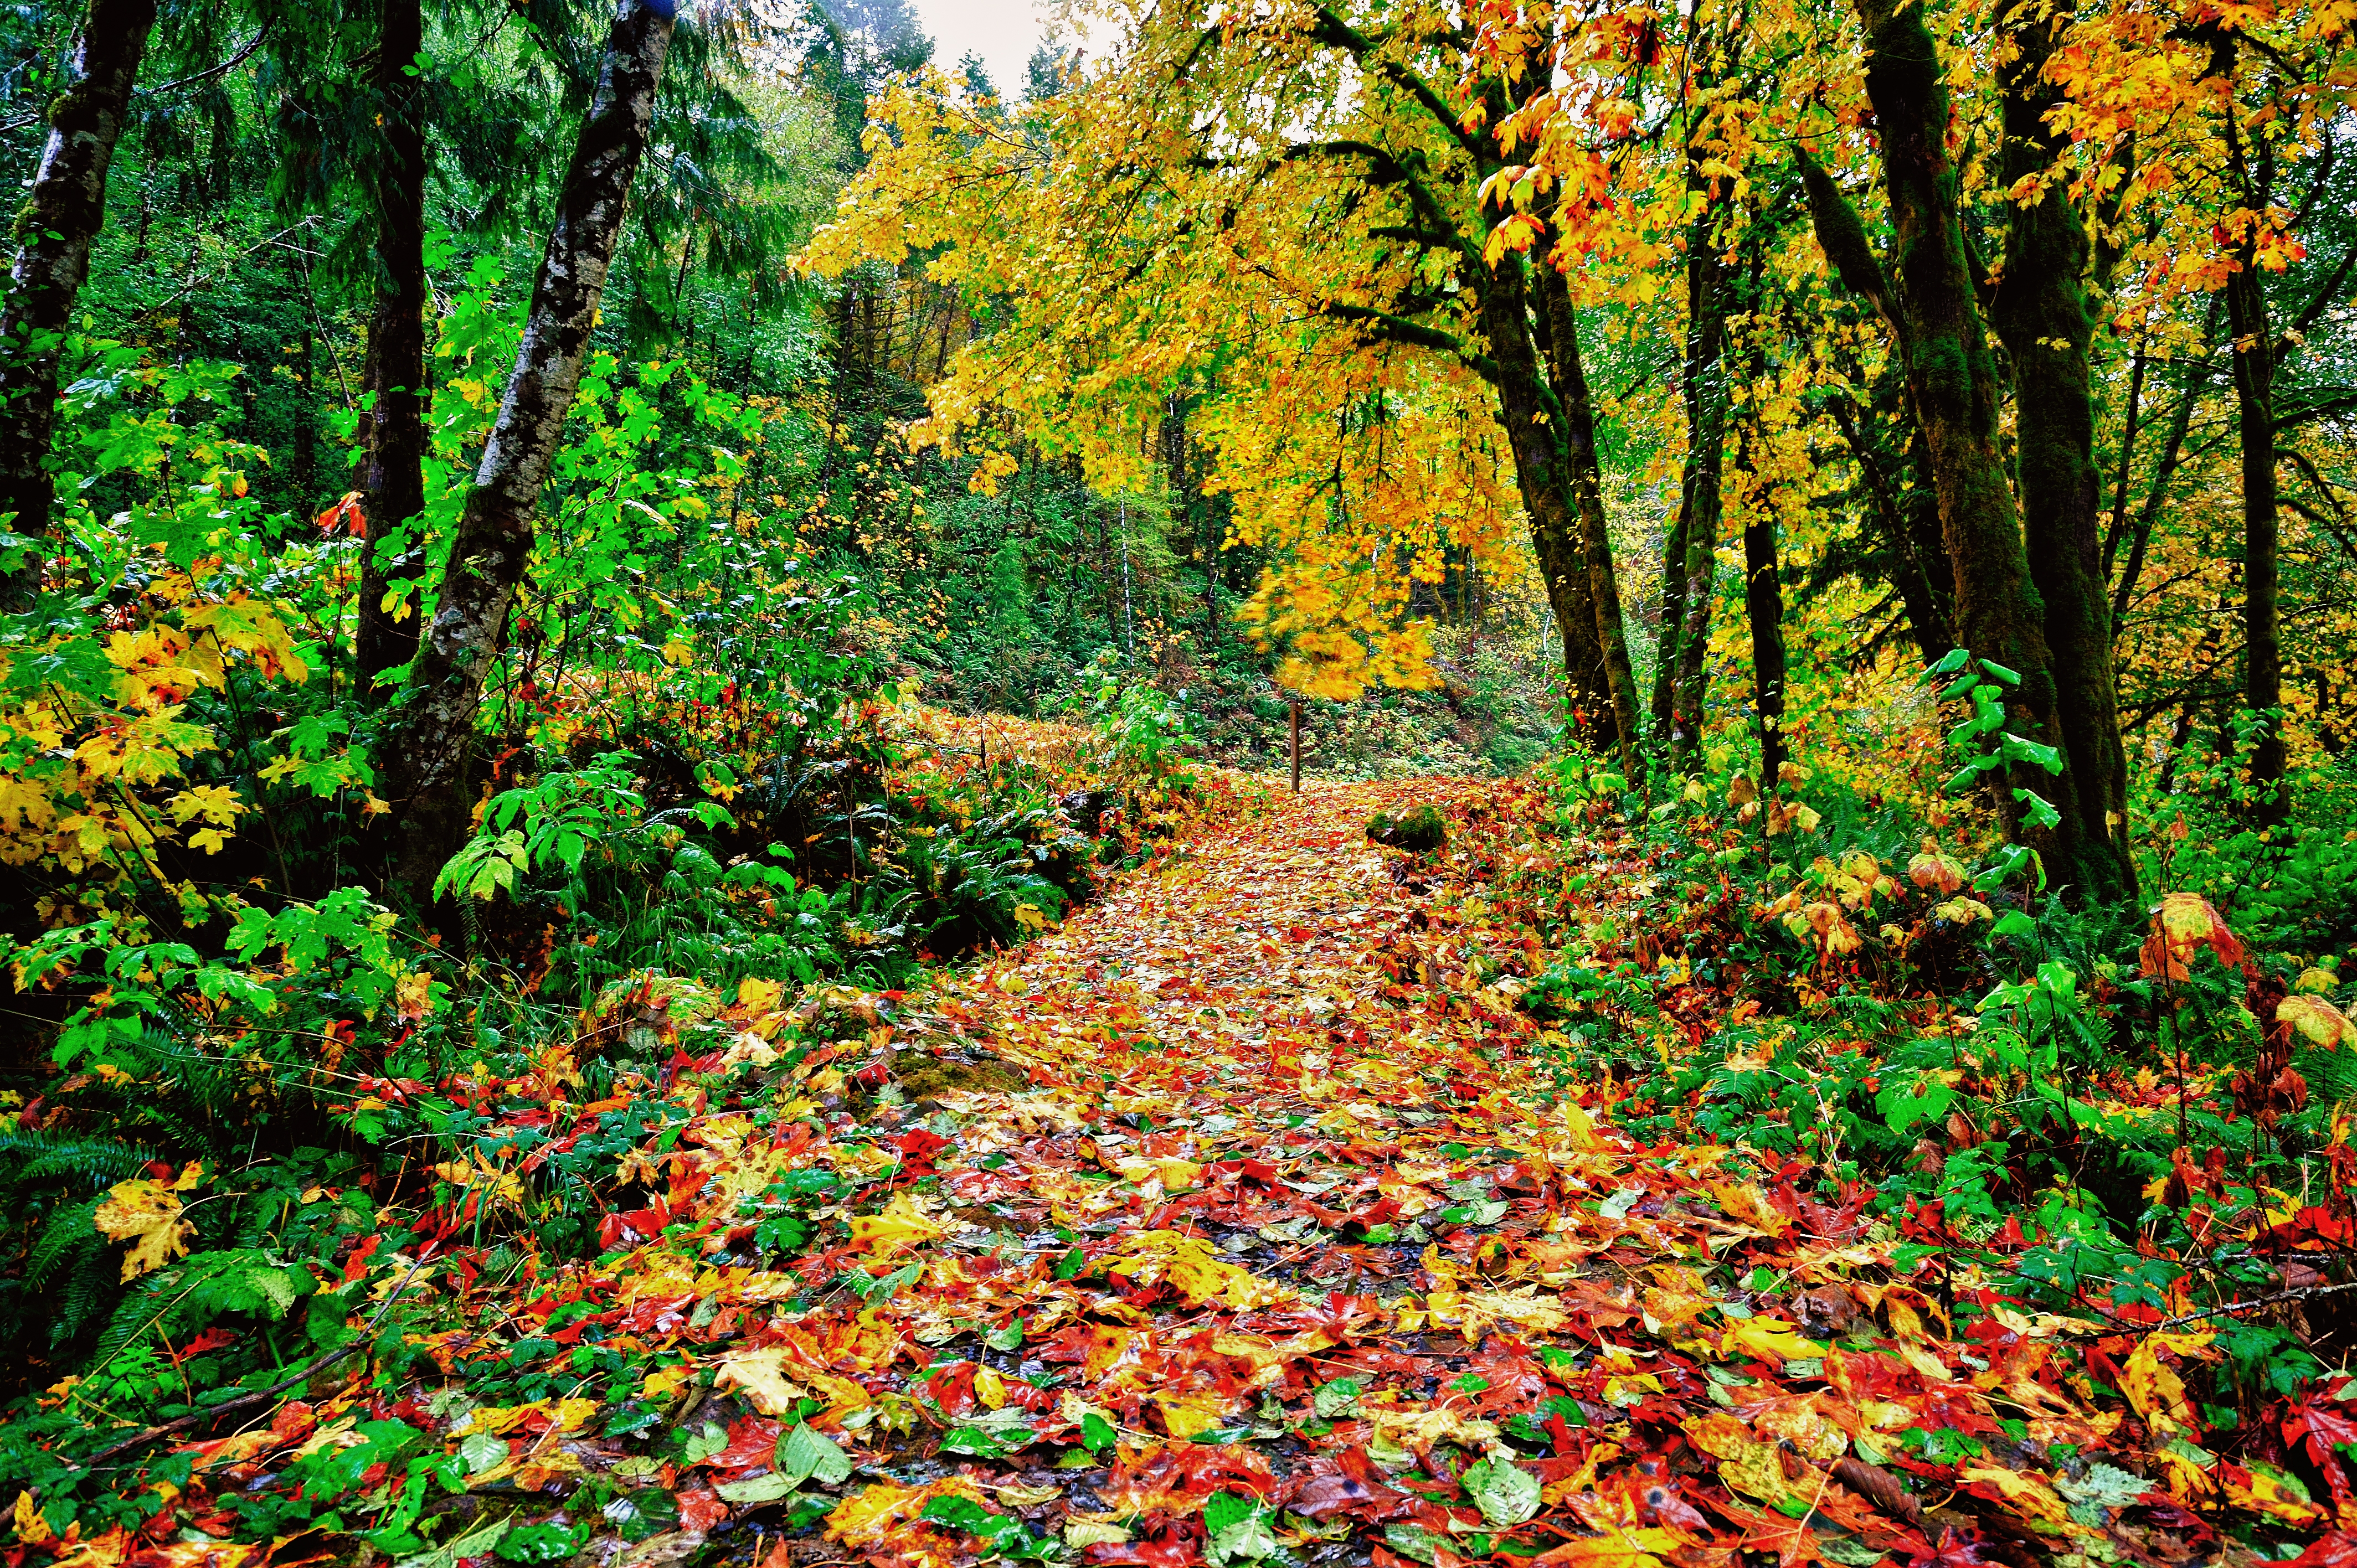 A forest path of colored fallen leaves